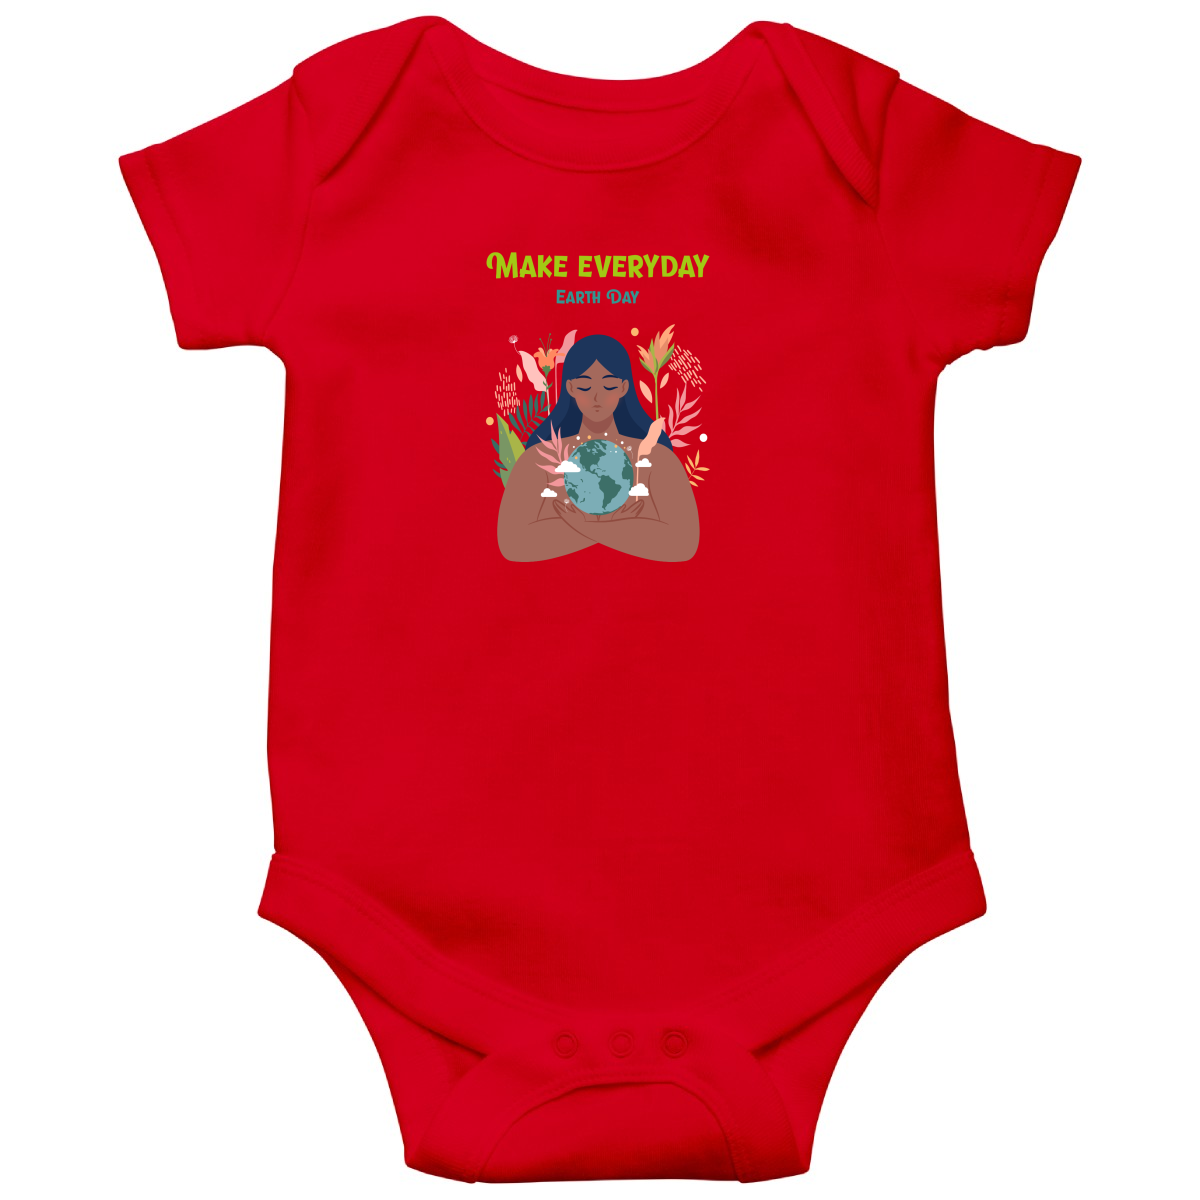 Earth Day Everyday Baby Bodysuits | Red